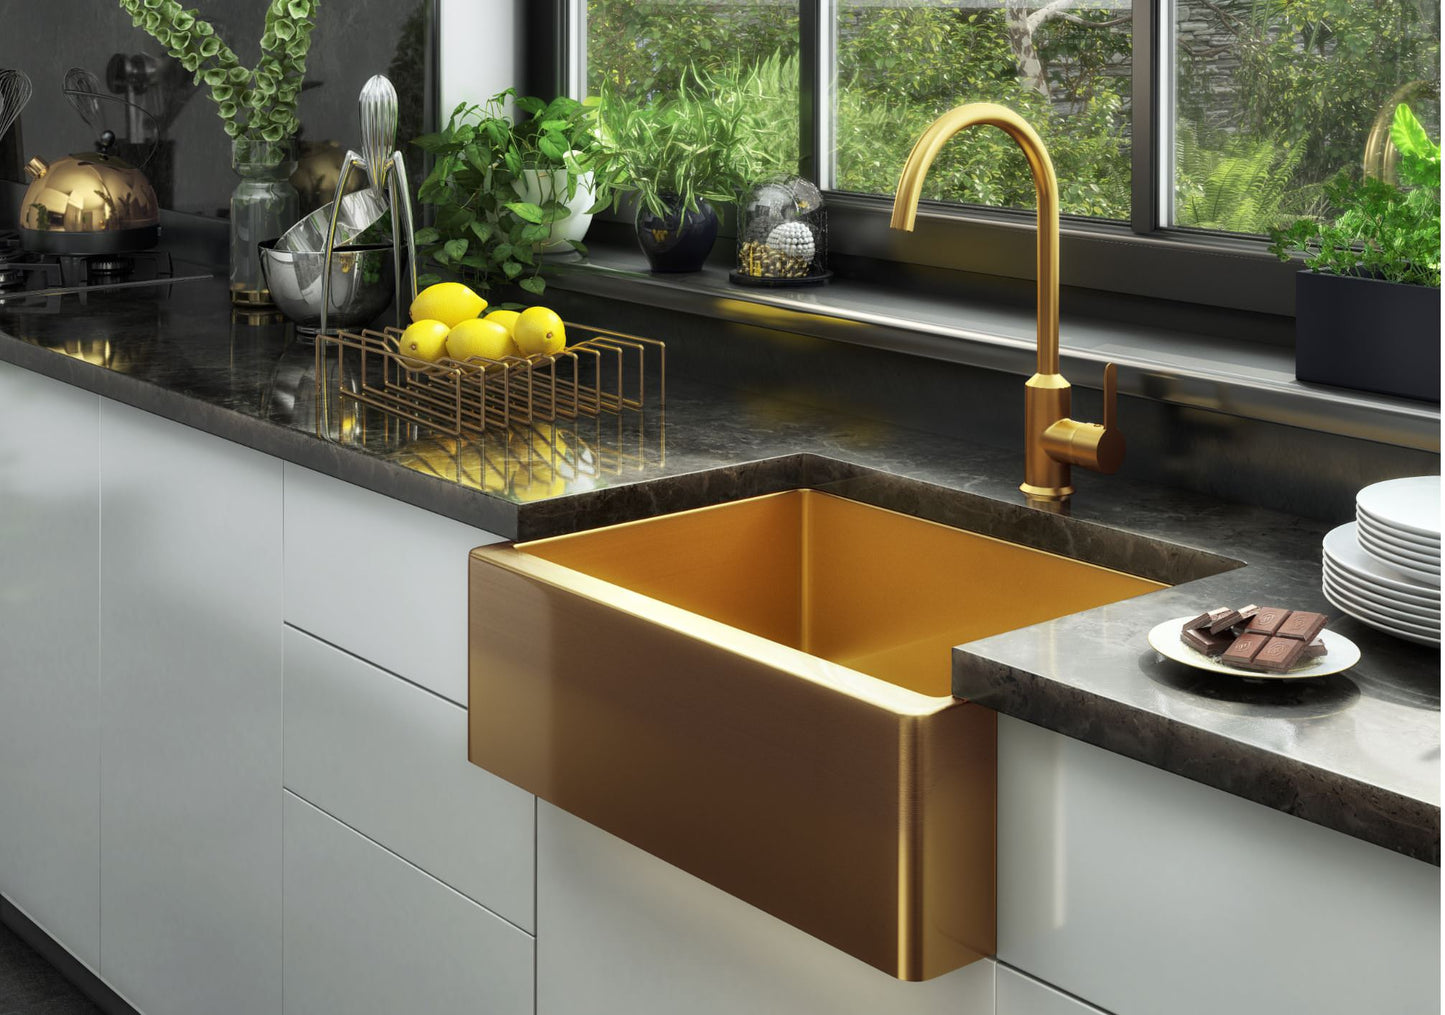 Hiranga Stainless Steel Belfast Sink - 2 Colours available